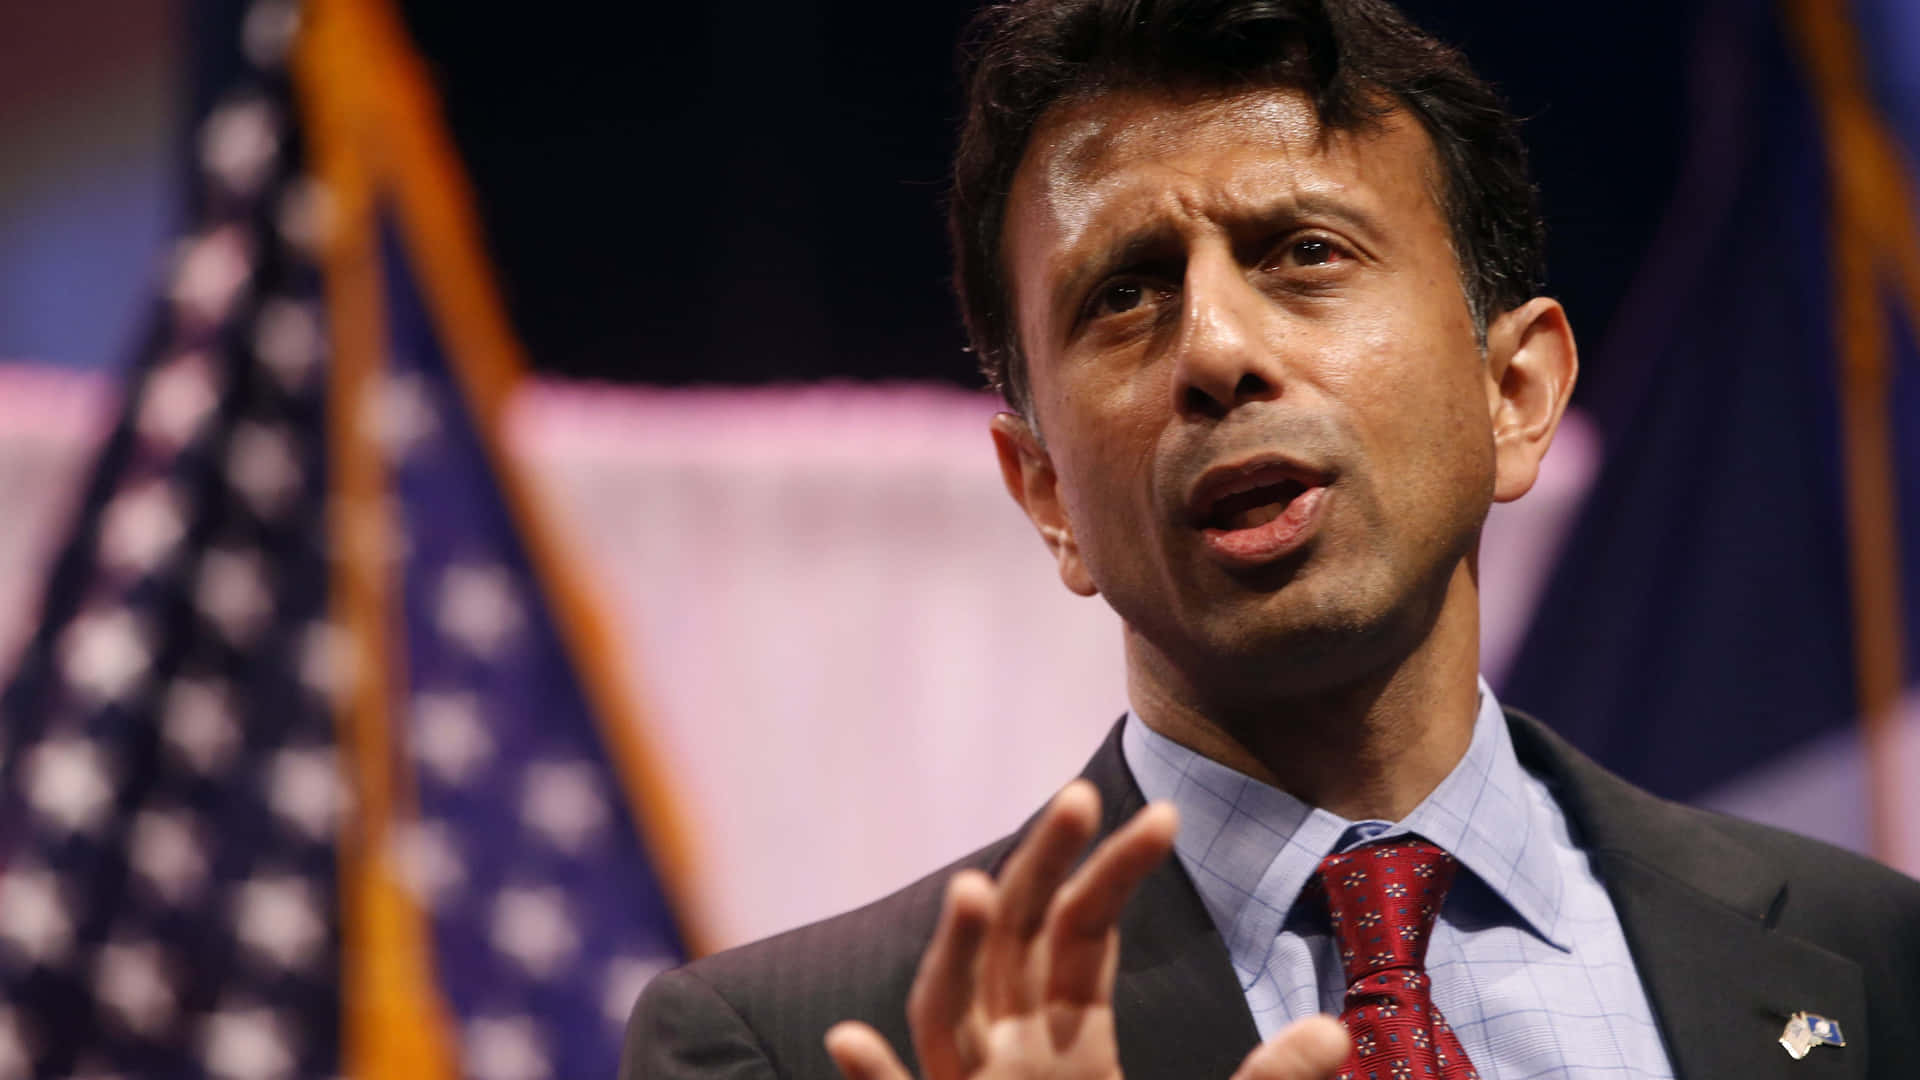 Bobby Jindal With US Flags Wallpaper